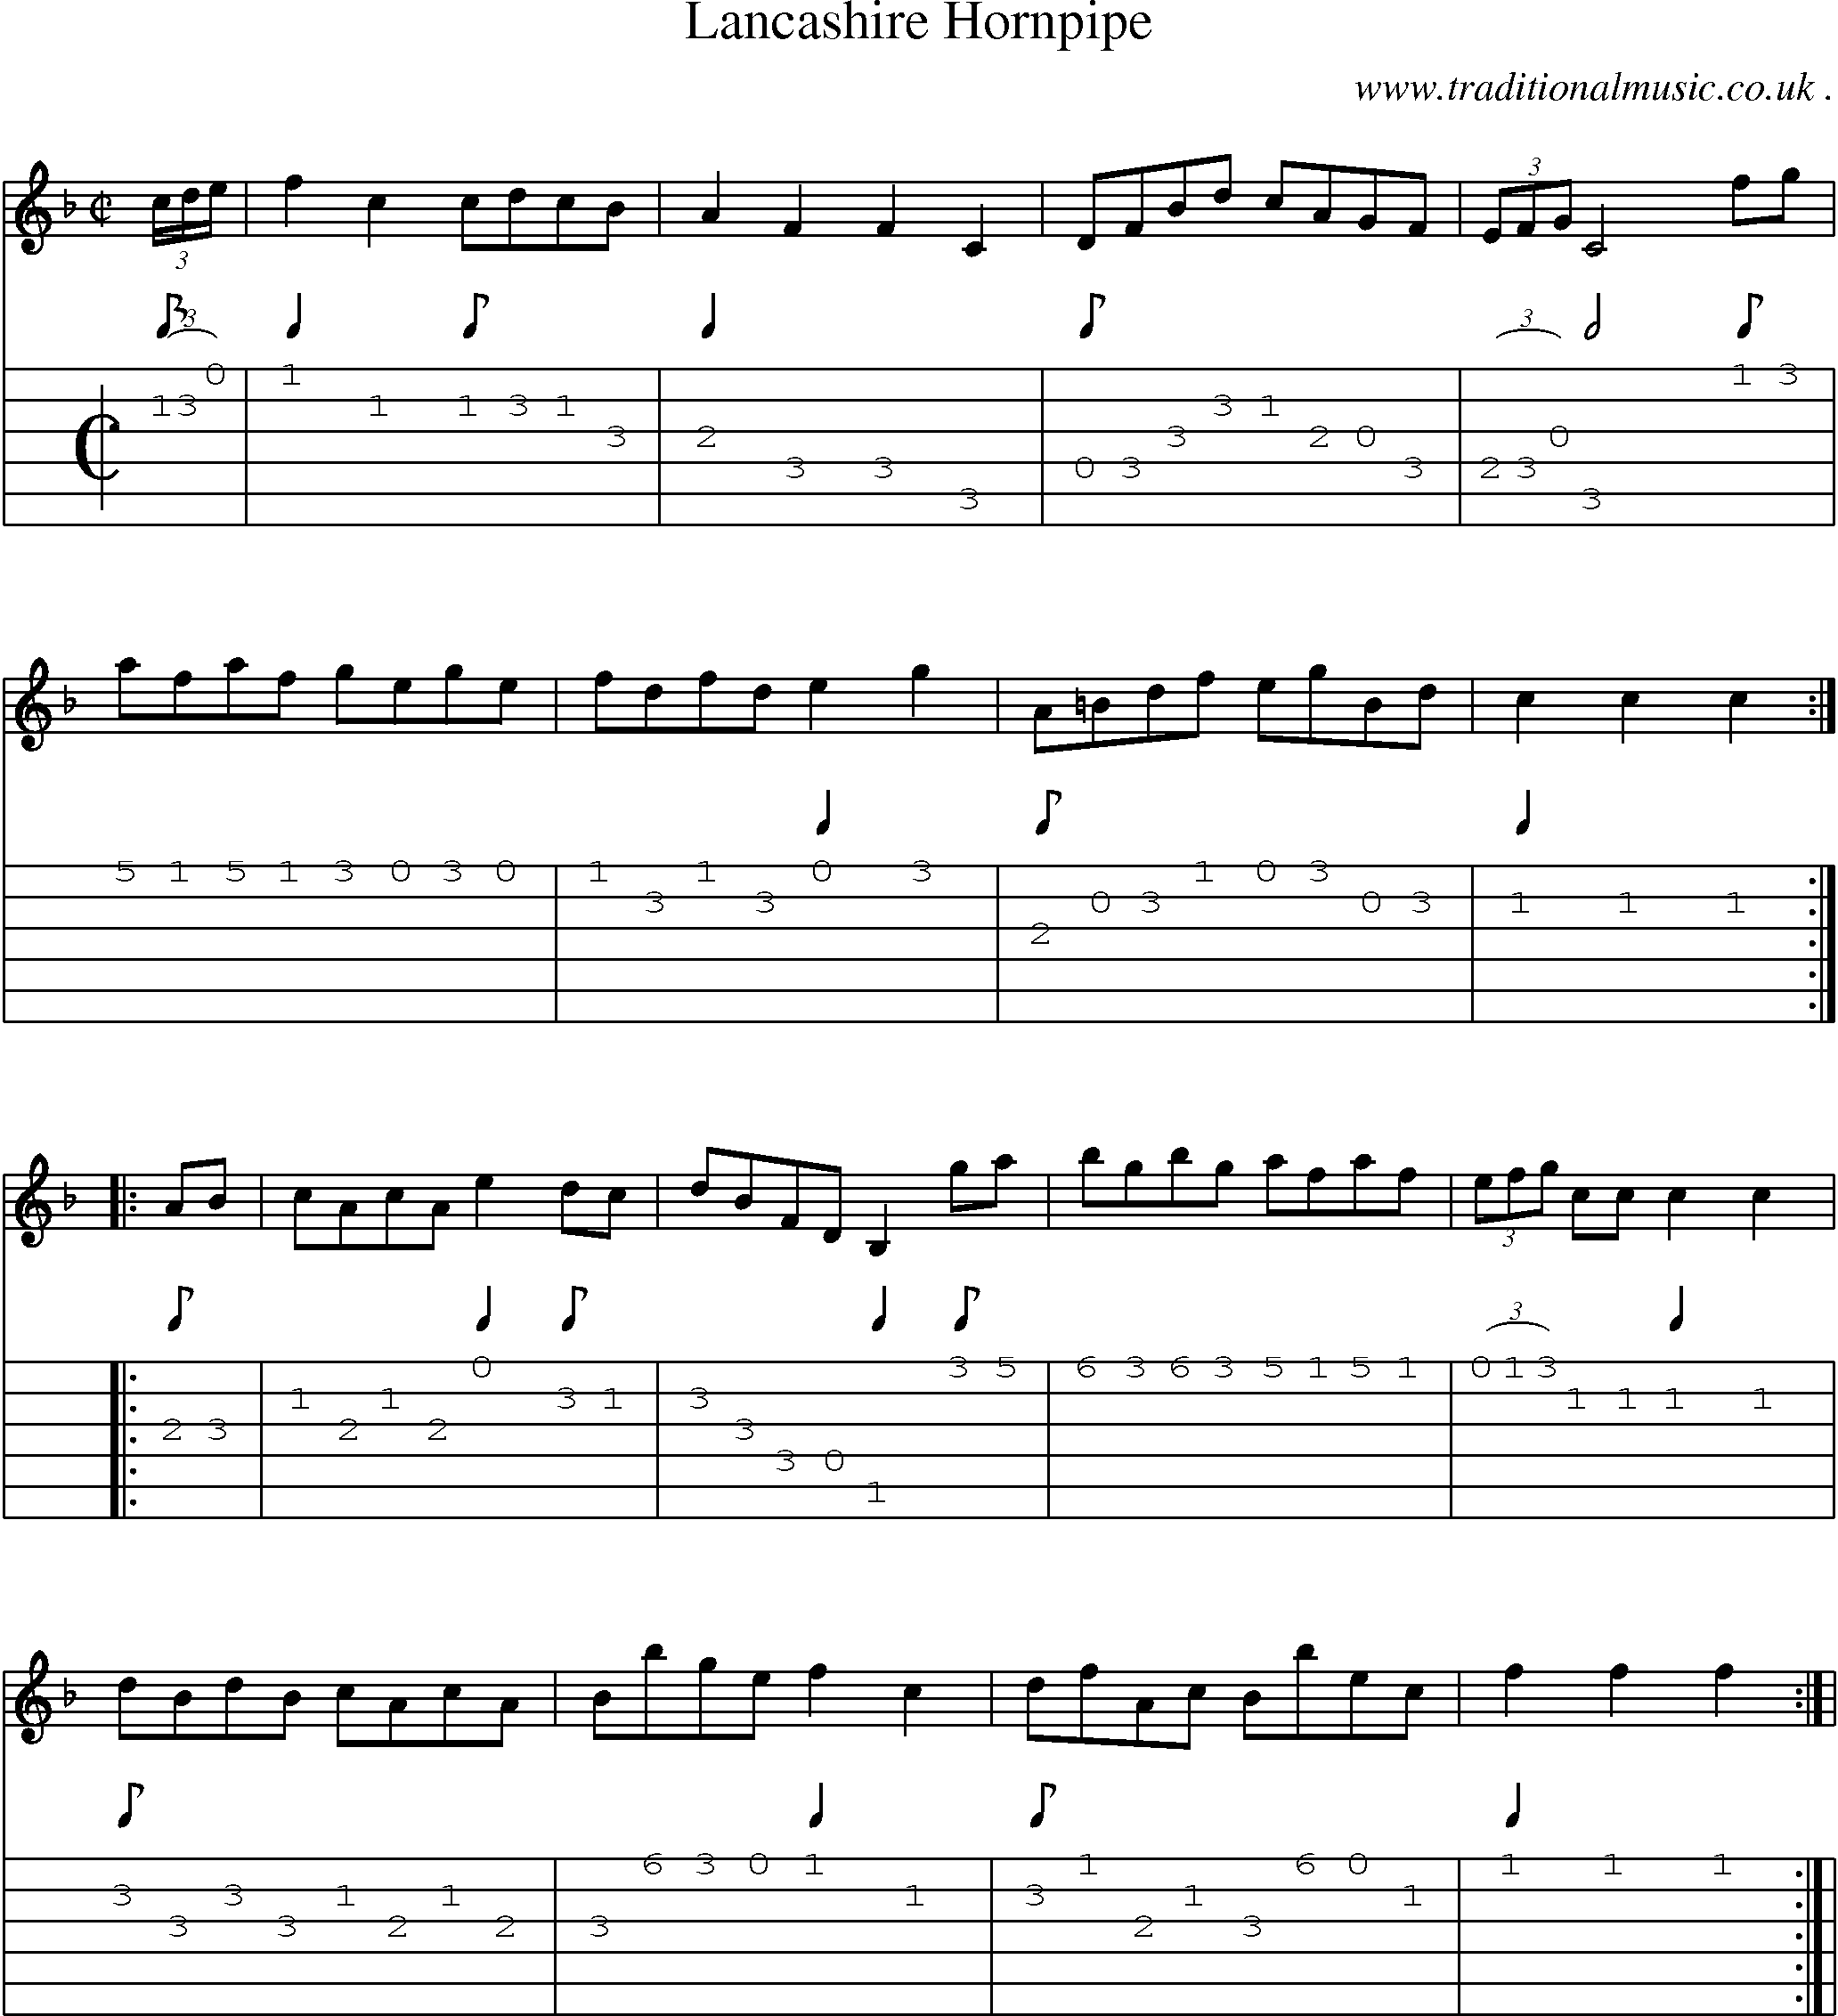 Sheet-Music and Guitar Tabs for Lancashire Hornpipe